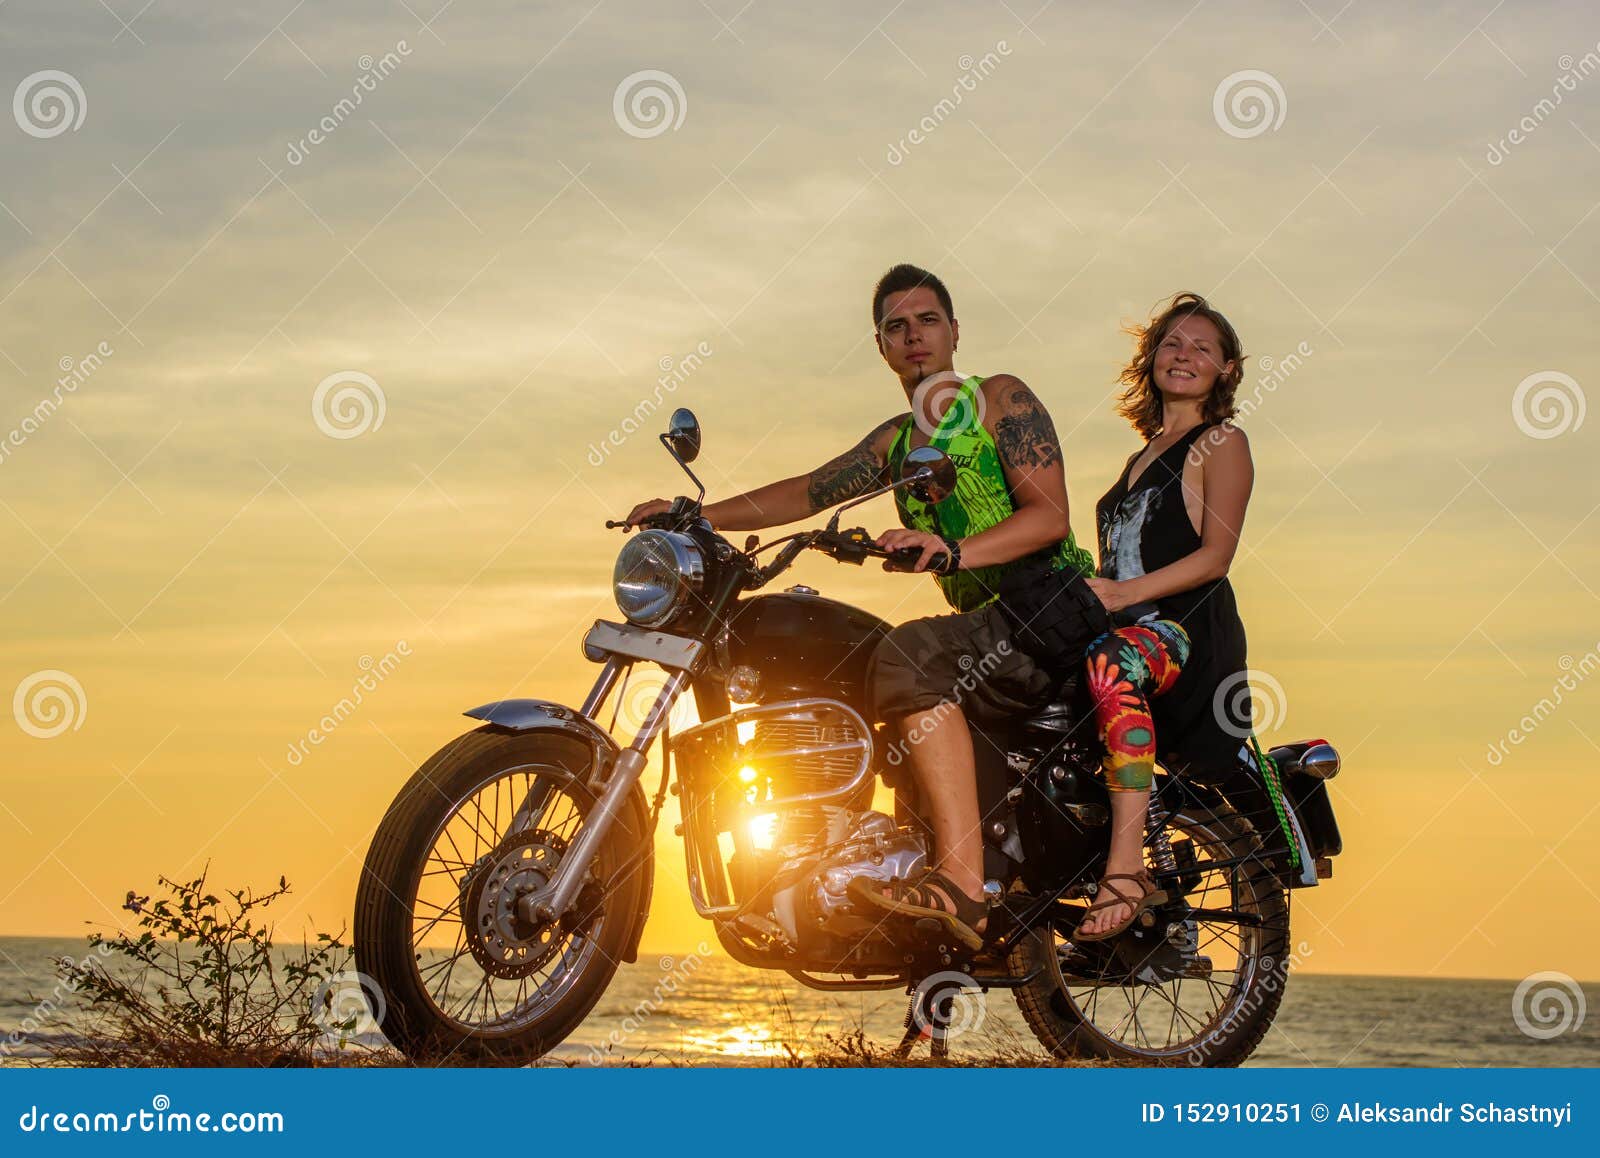 Edgy Vancouver Couple Takes Harley Motorcycle for a Spin at Engagement  Session … | Wedding photoshoot poses, Pre wedding photoshoot outdoor, Pre  wedding shoot ideas